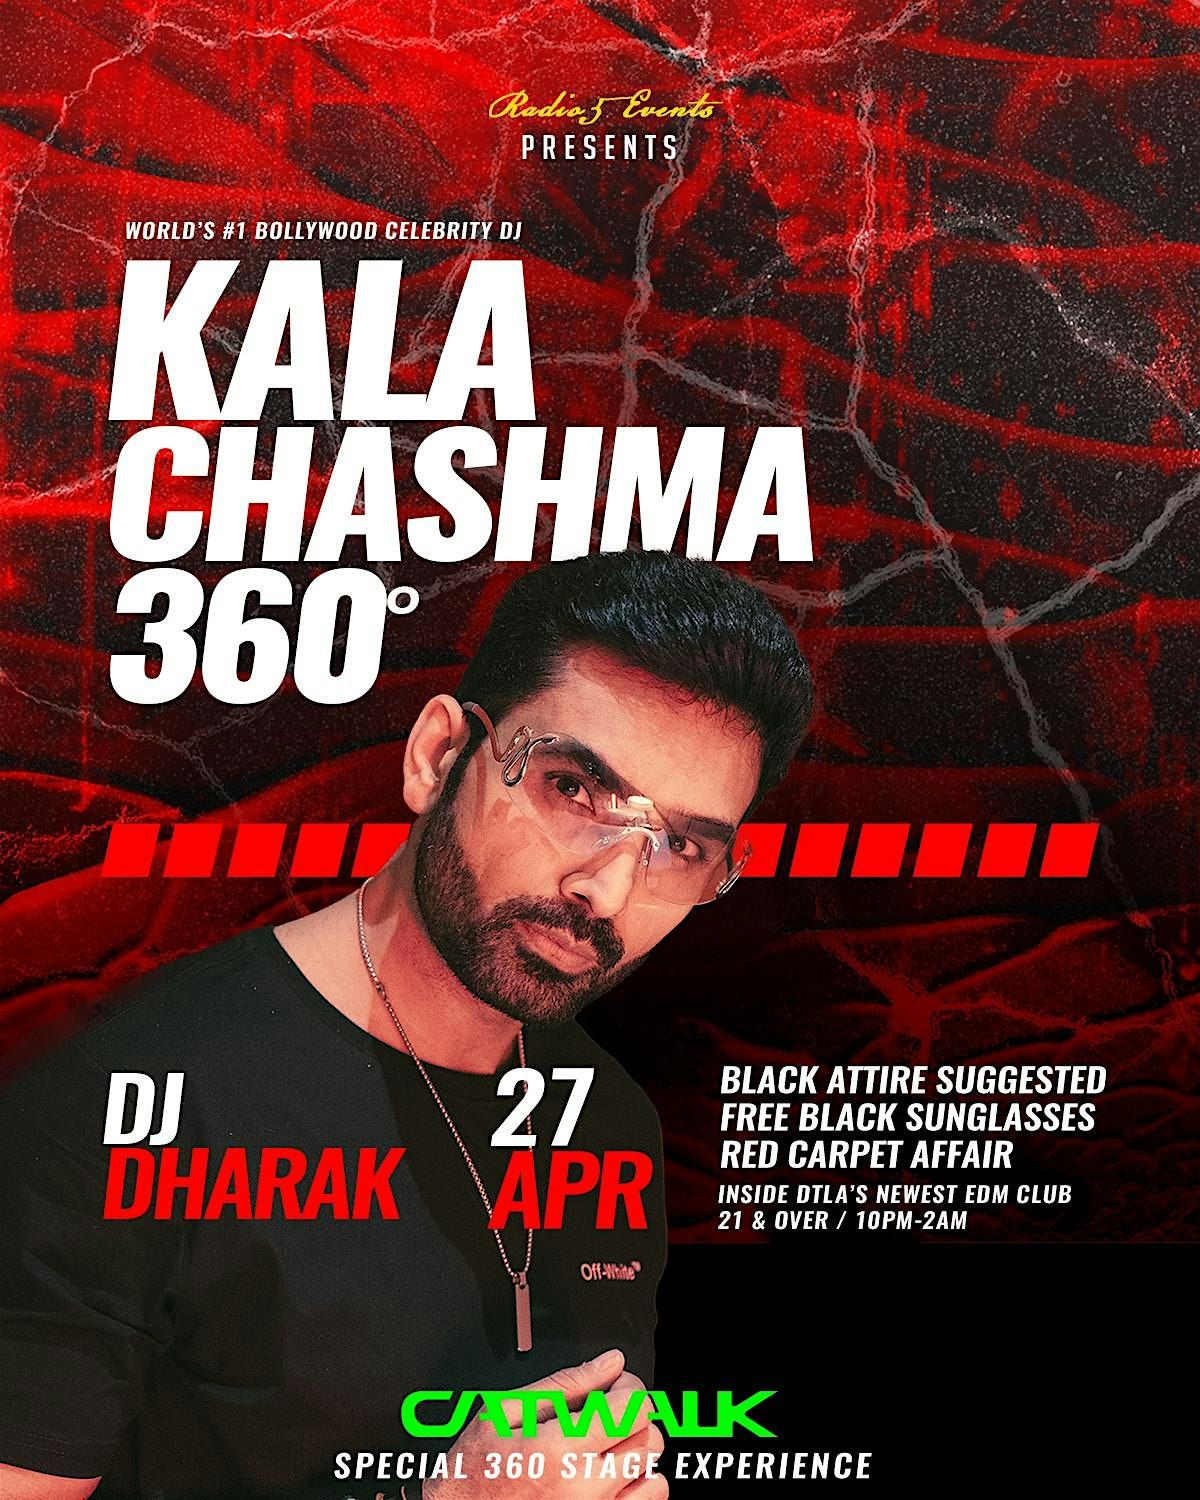 Bollywood Party with India's #1 Celebrity DJ DHARAK - All BLACK Affair!